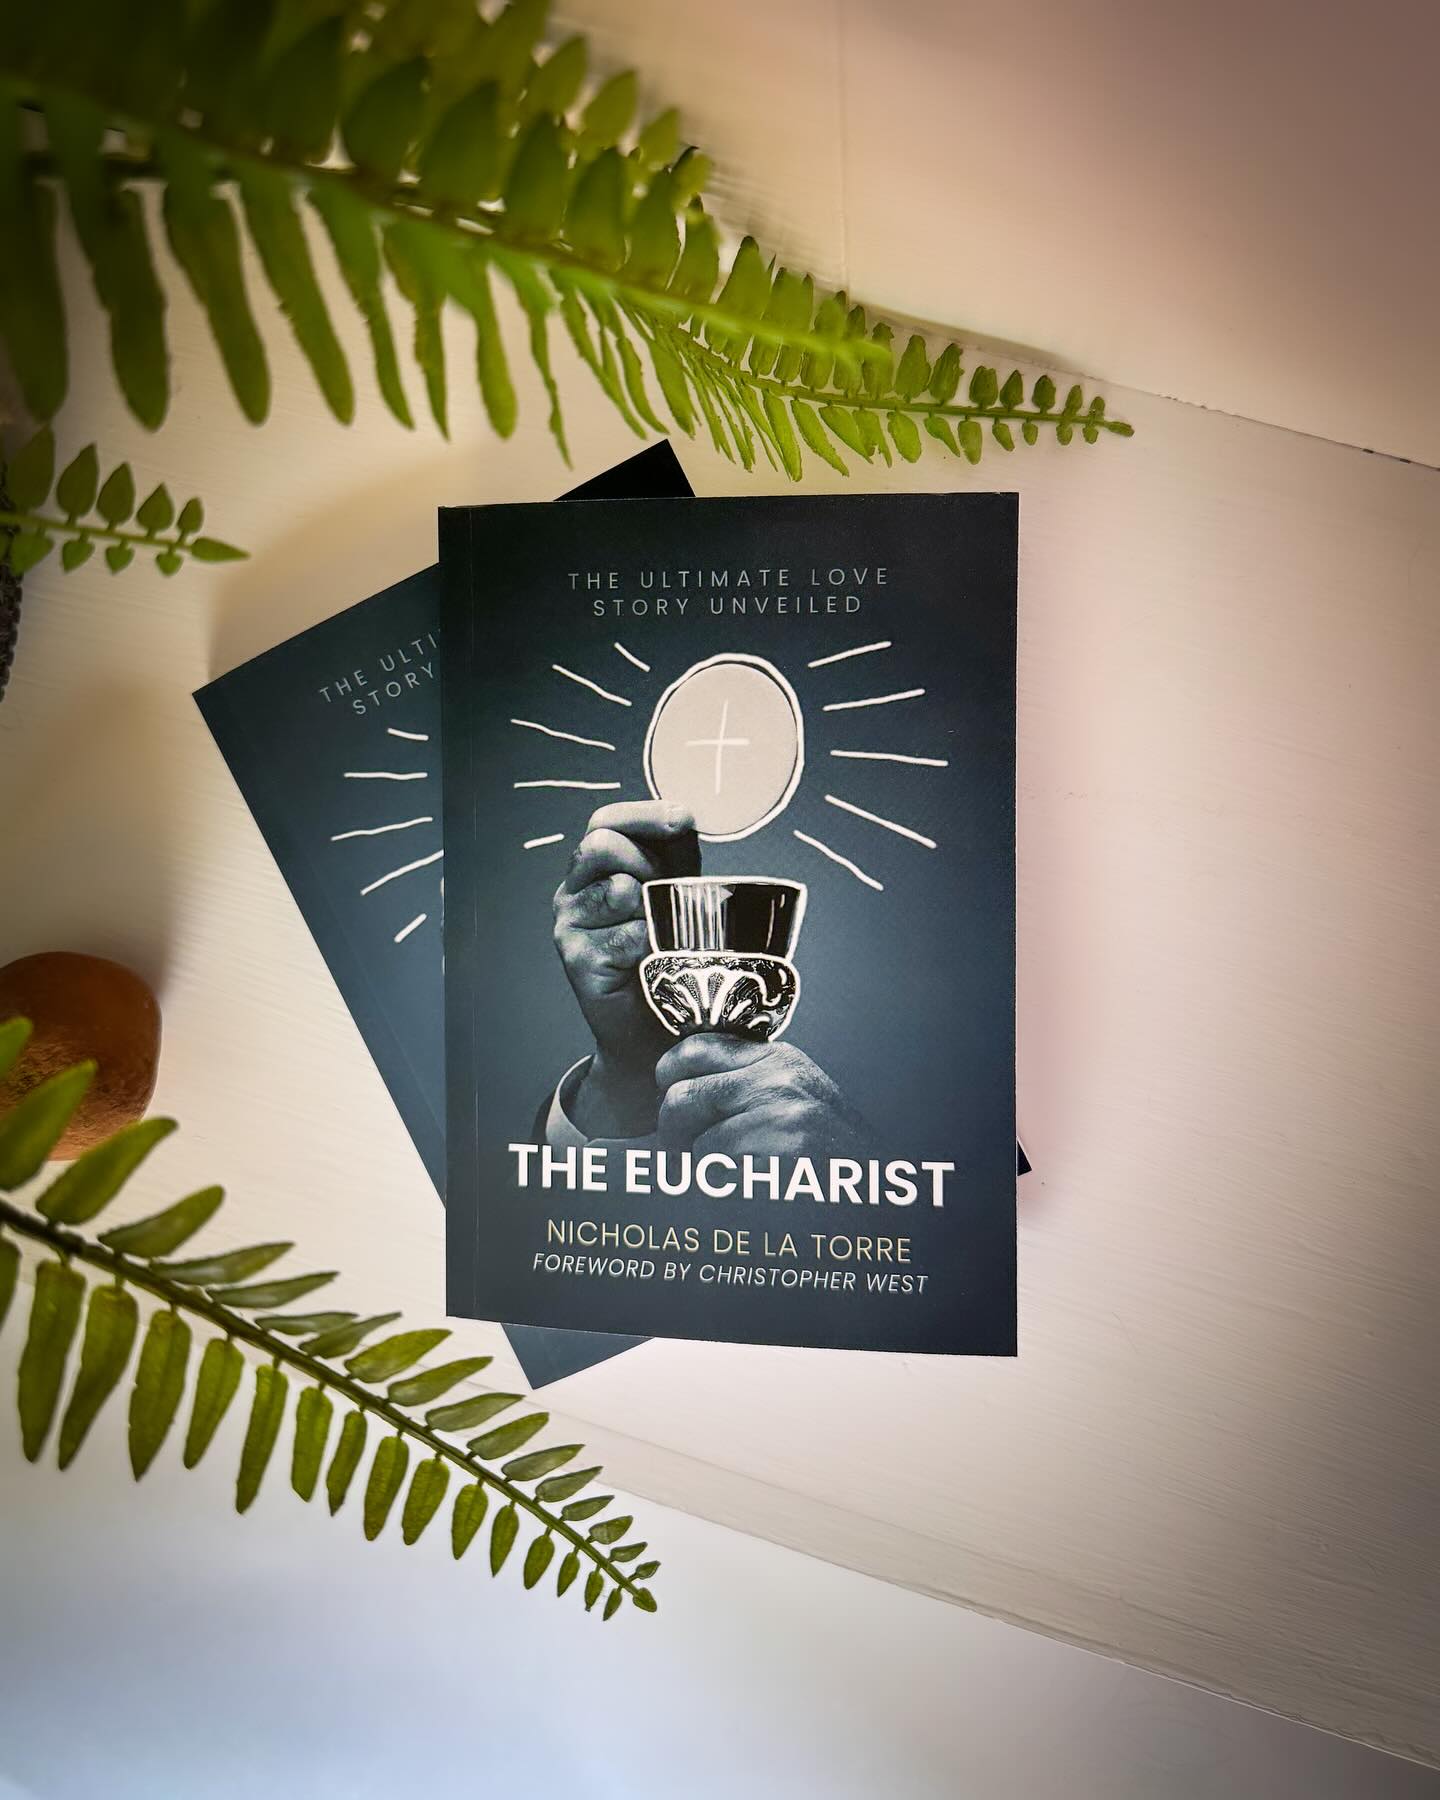 The Eucharist: The Ultimate Love Story Unveiled